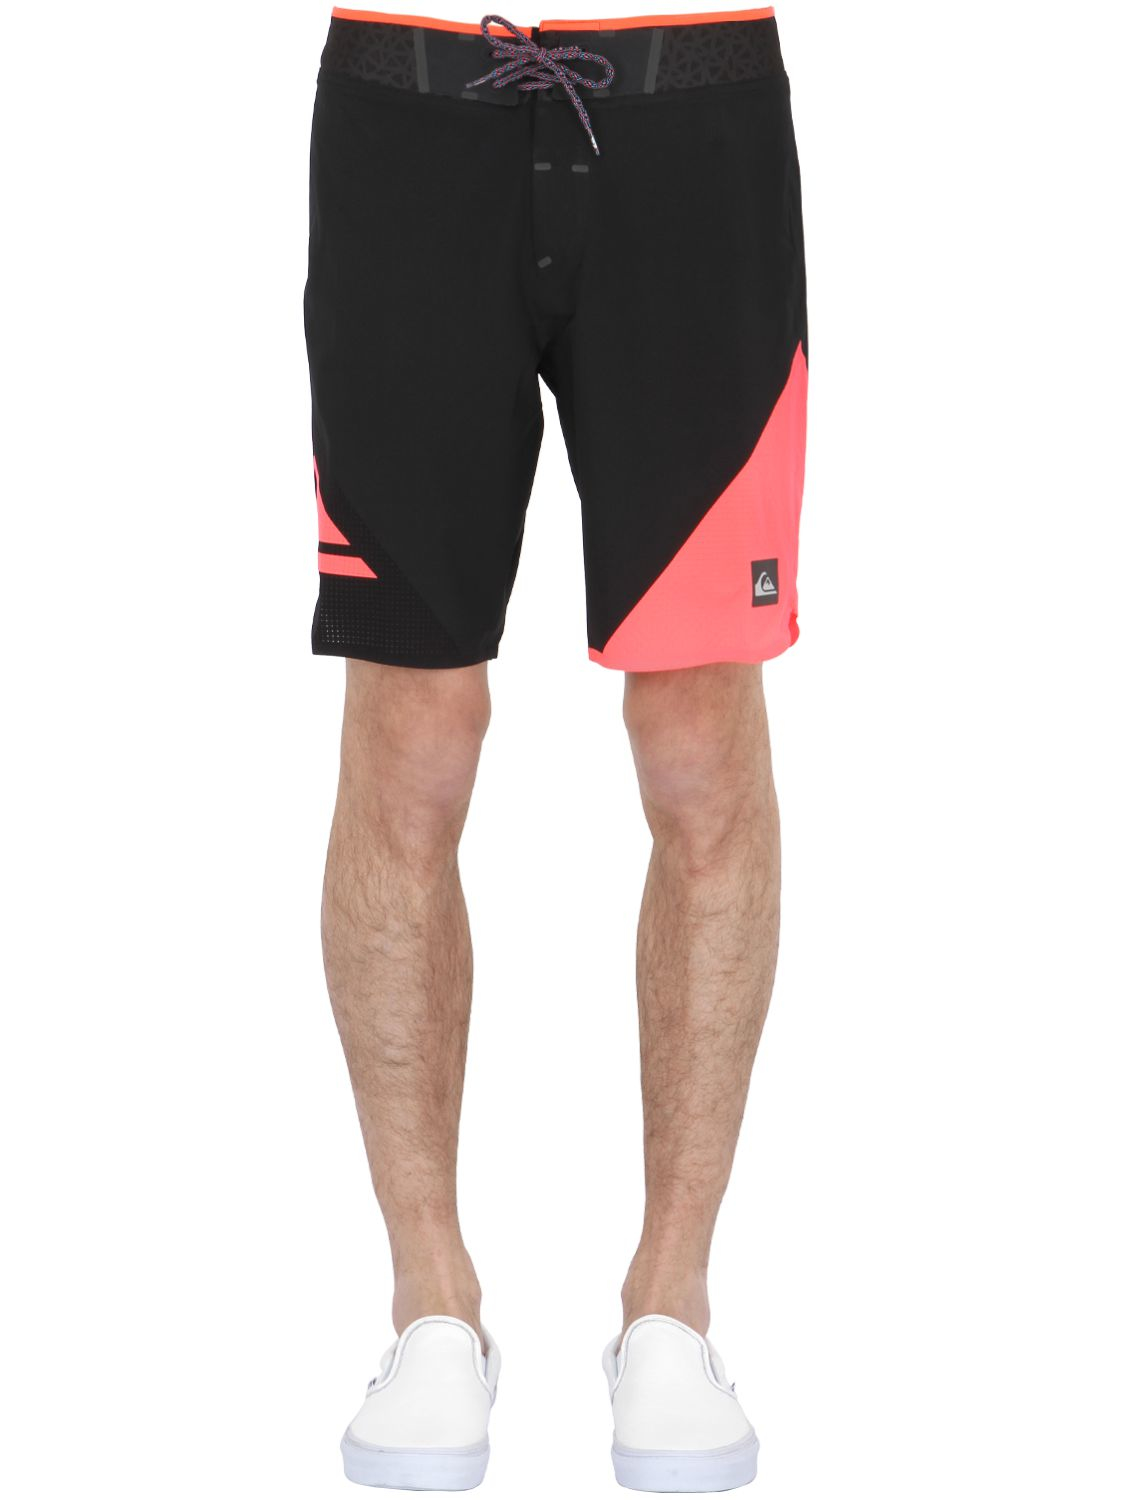 Quiksilver Synthetic Ag47 New Wave 19" Stretch Boardshorts in Black/Orange  (Black) for Men - Lyst